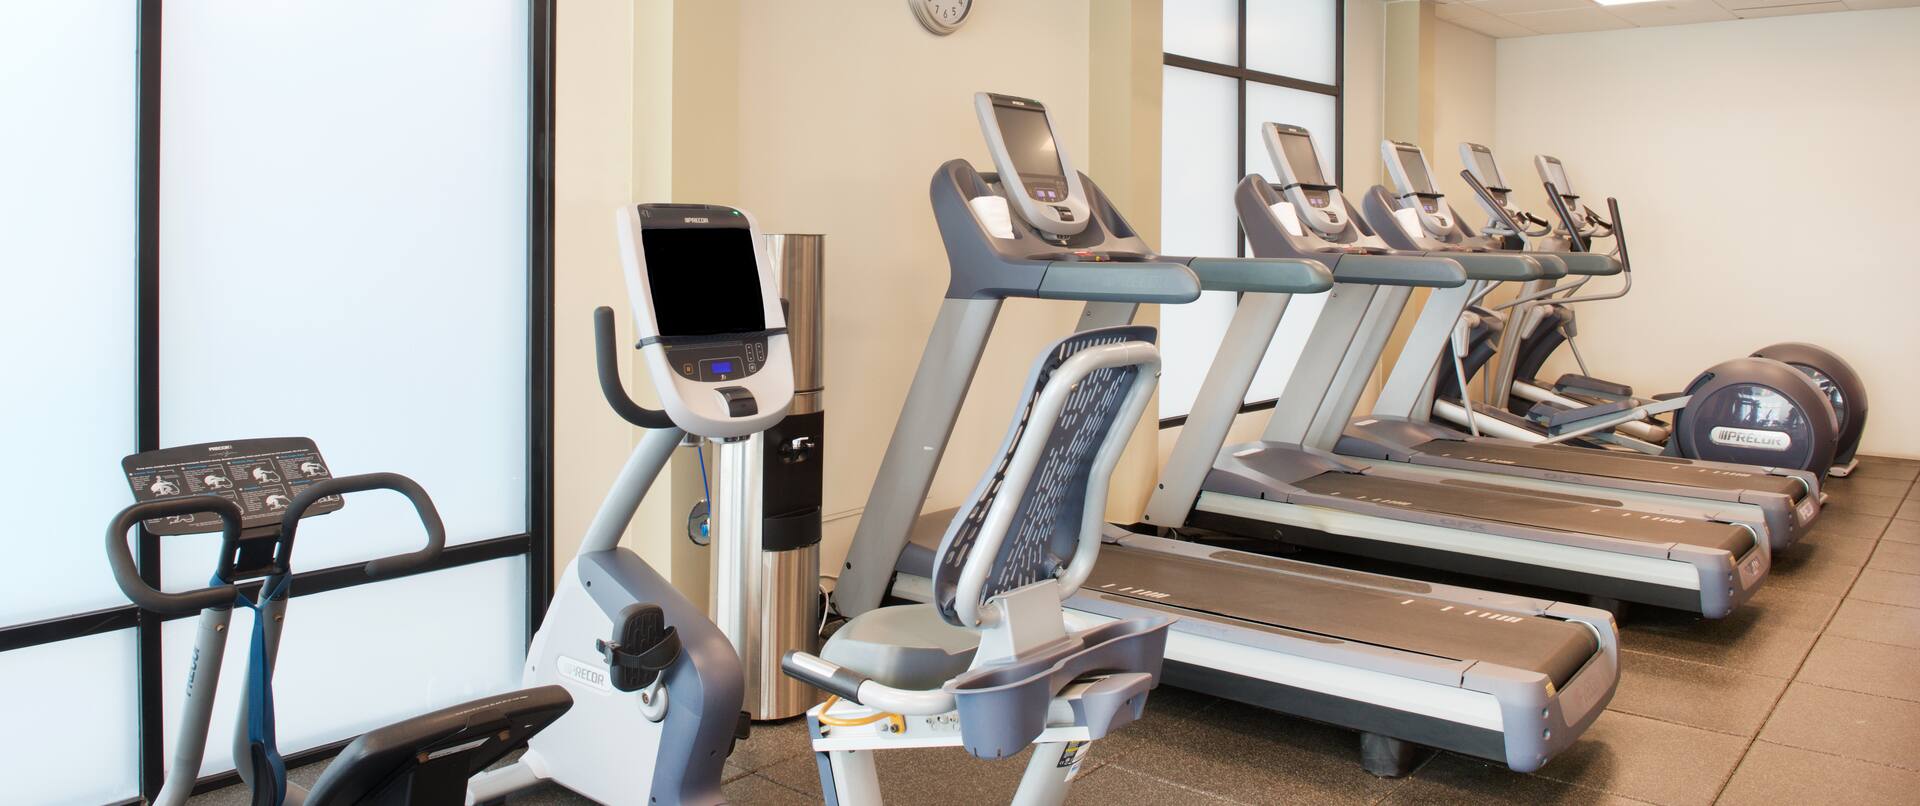 Fitness Room with Treadmills and Recumbent Bikes